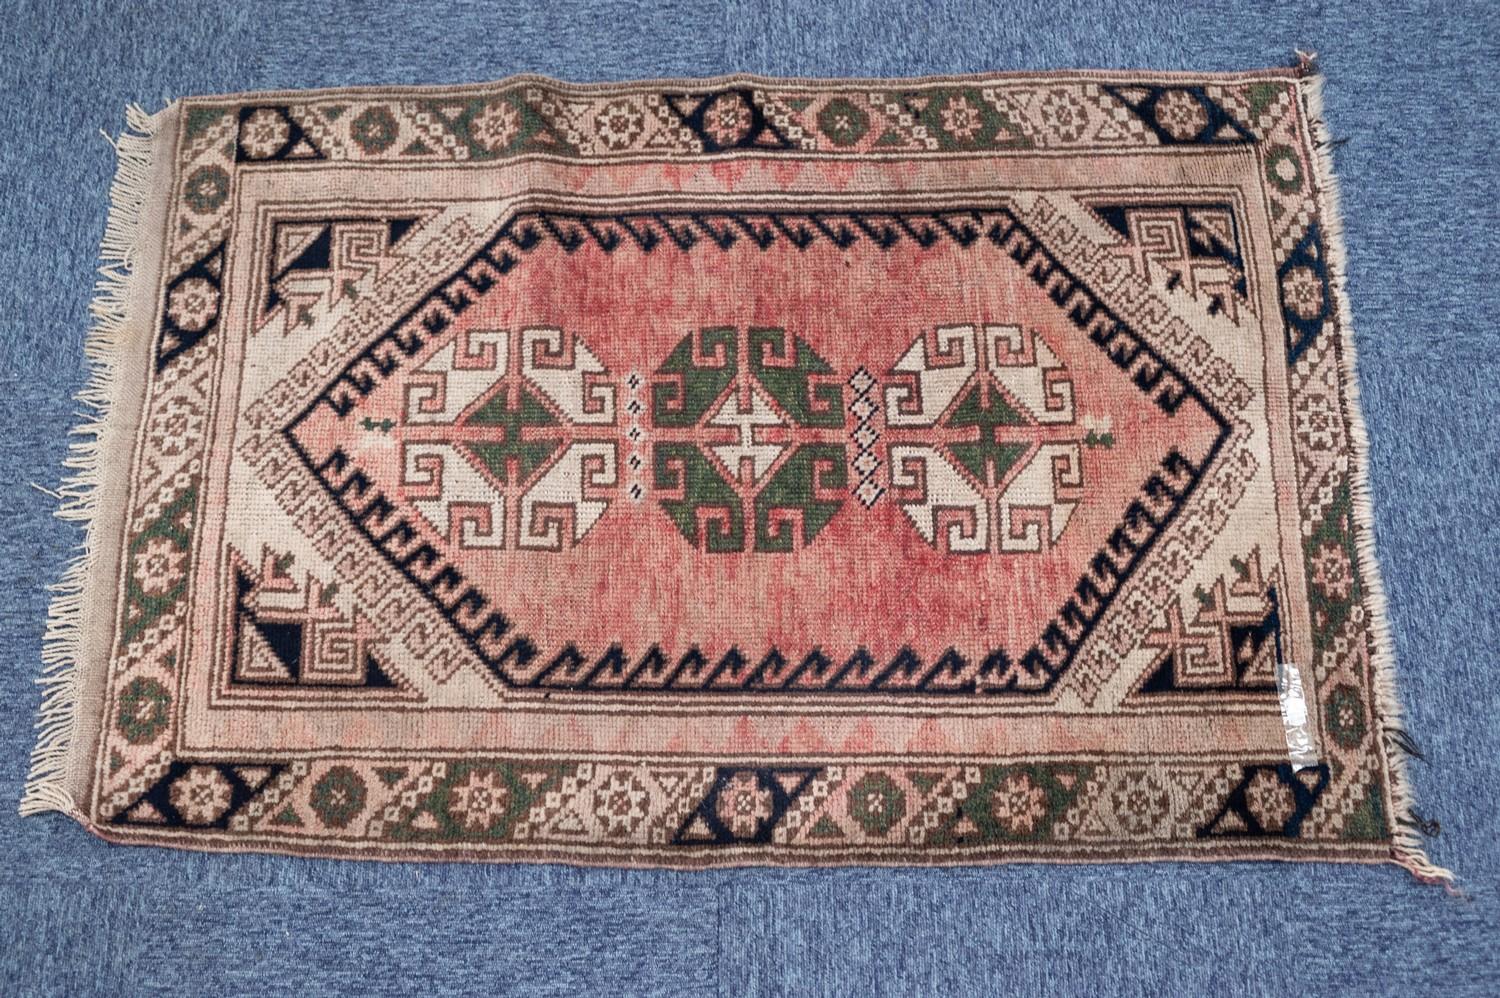 KARADAGH RUG, with row of three latch hook pattern medallions on a faded red field with spandrels,